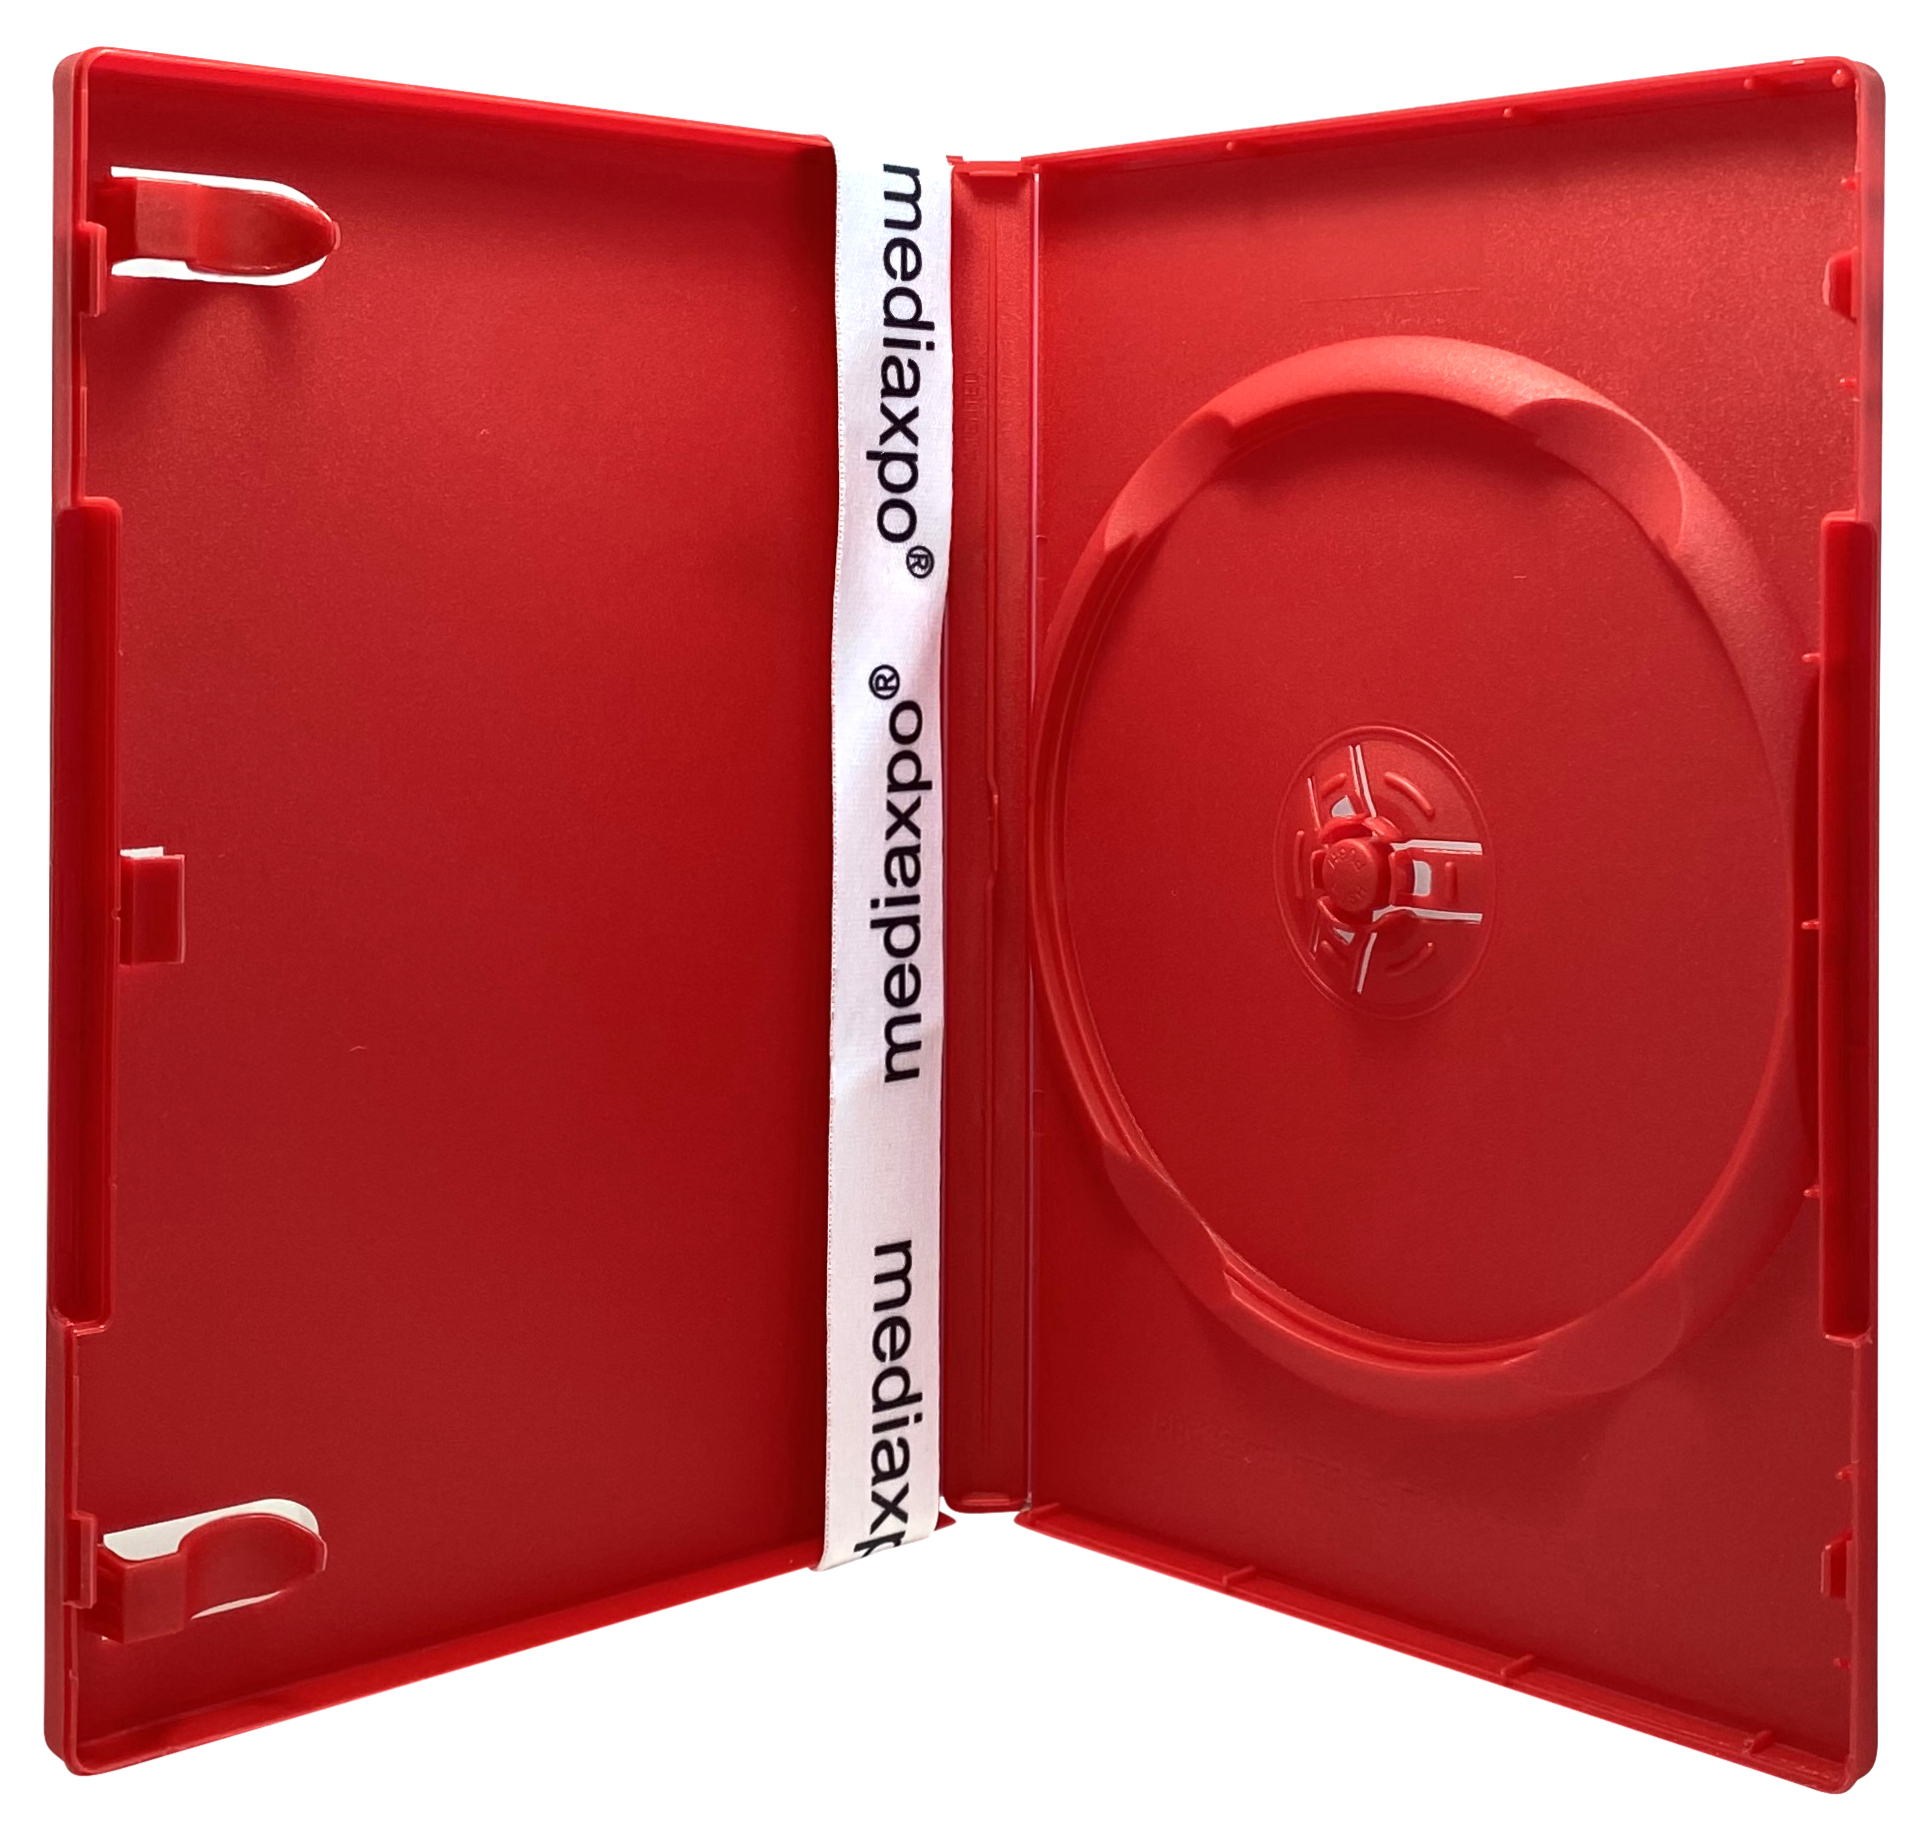 Image of ID 1214260149 200 STANDARD Solid Red Color Single DVD Cases